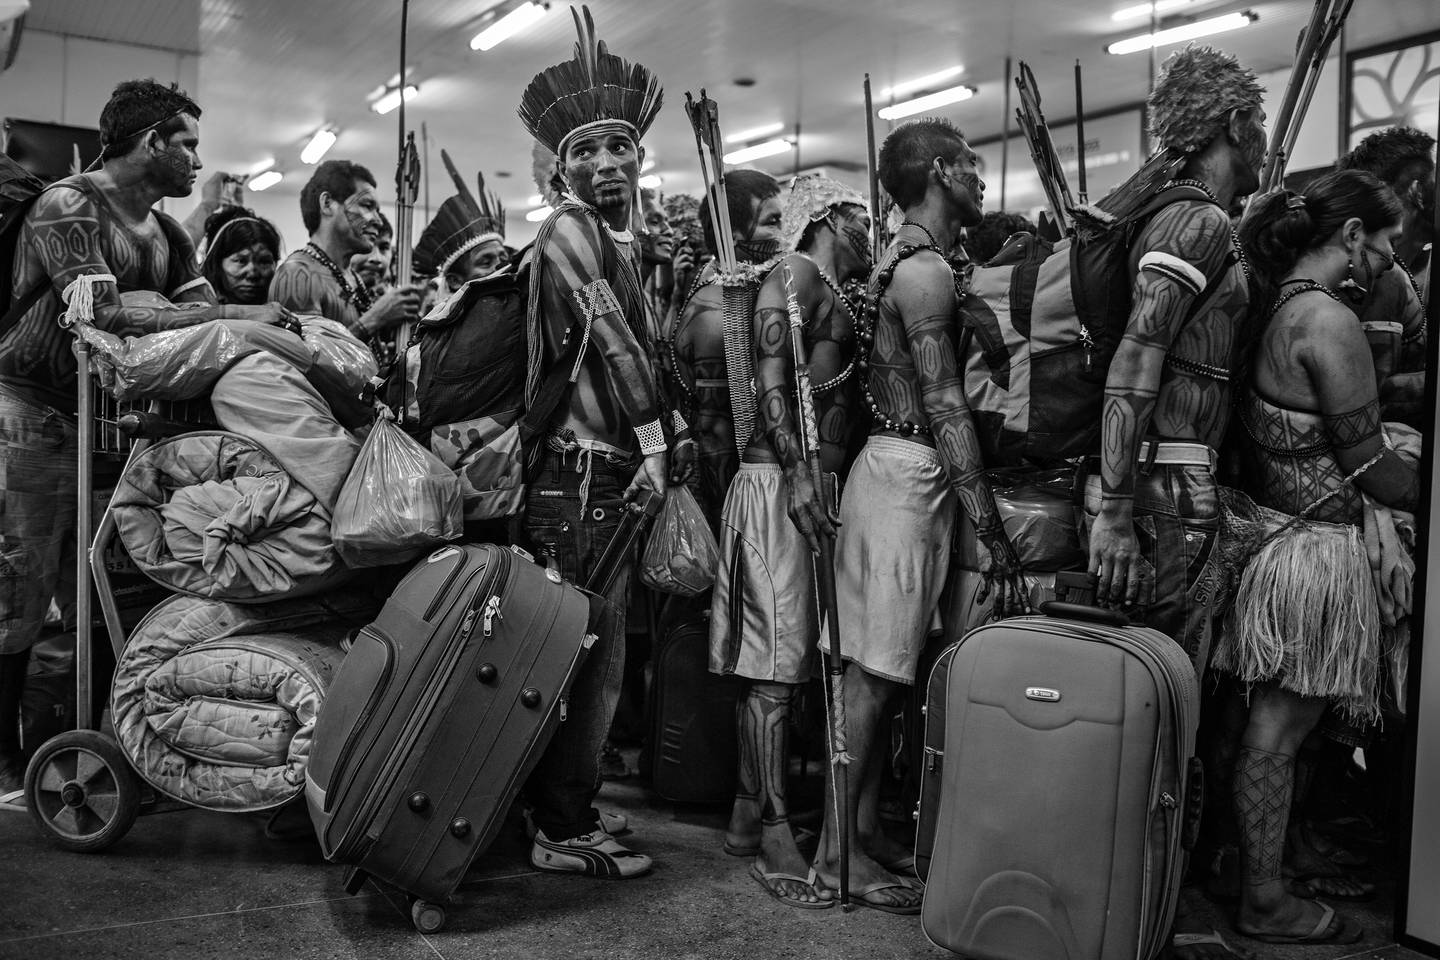 This image is part of Lalo de Almeida's series titled 'Amazonian Dystopia', which won the World Press Photo Contest's Long-Term Project award. AP